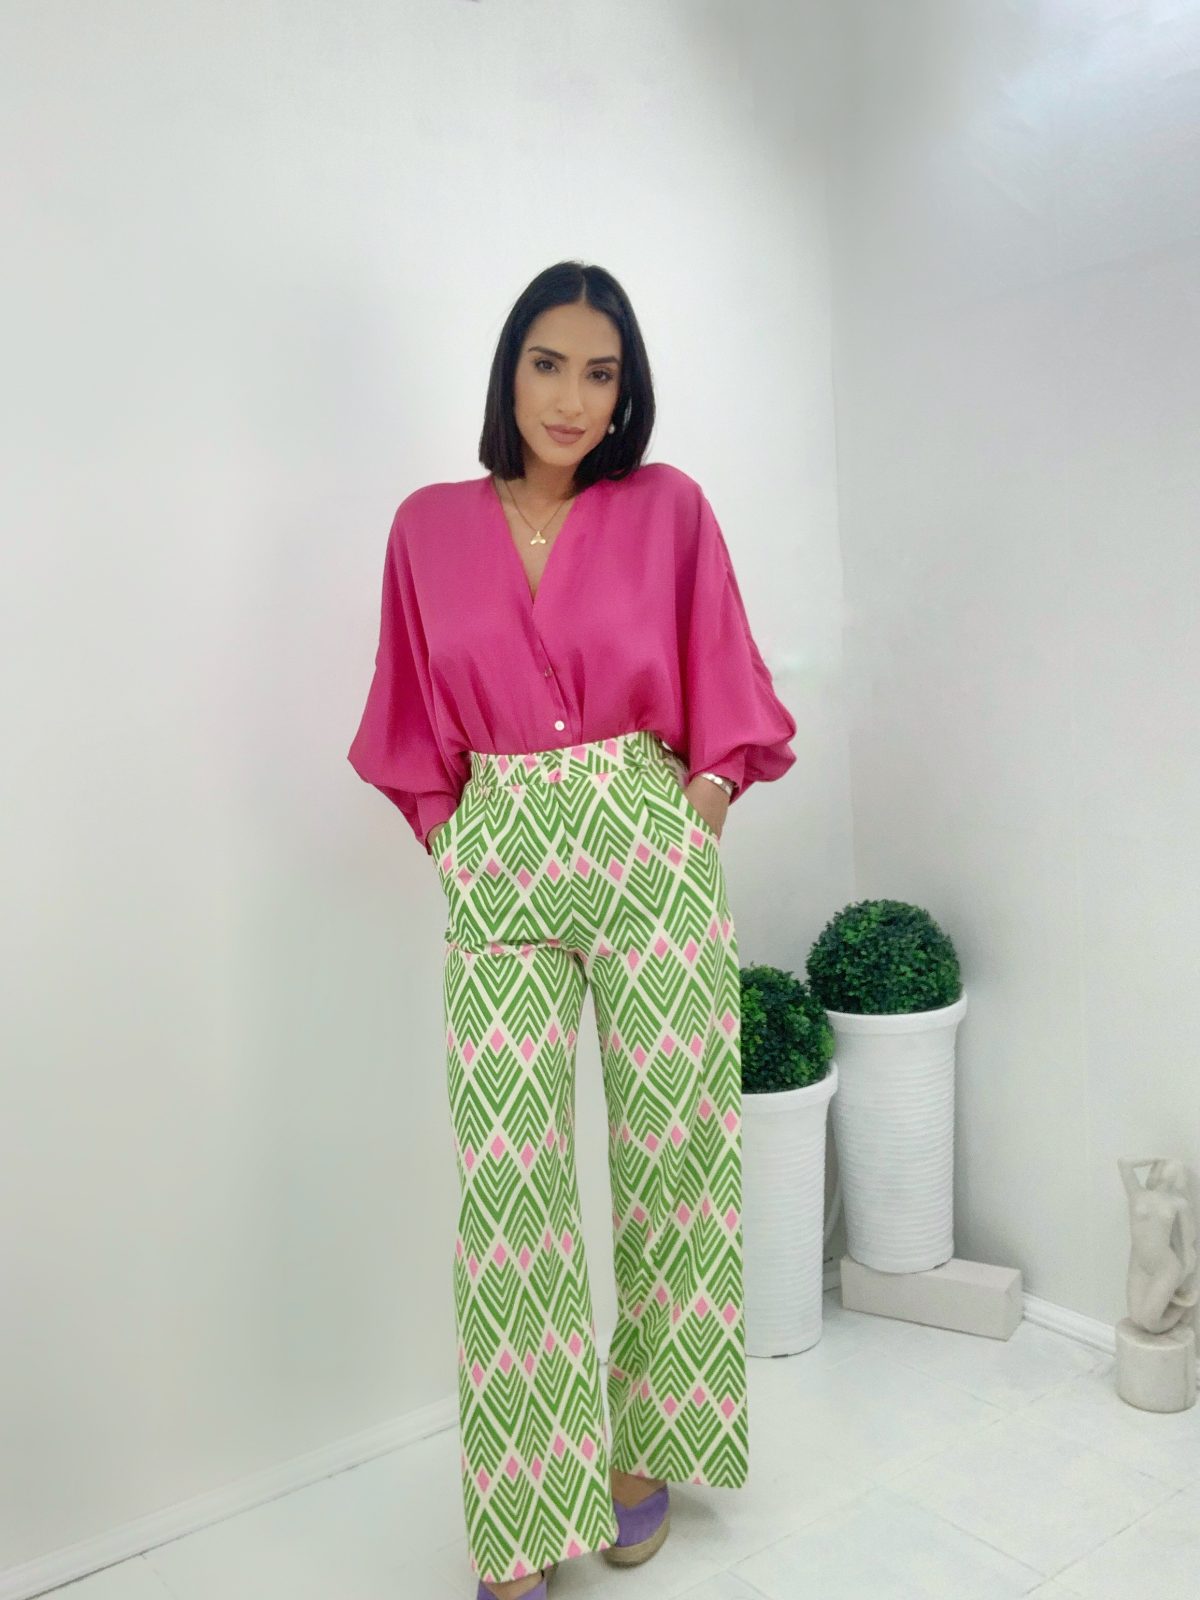 High-waisted pants with geometric patterns in green shades